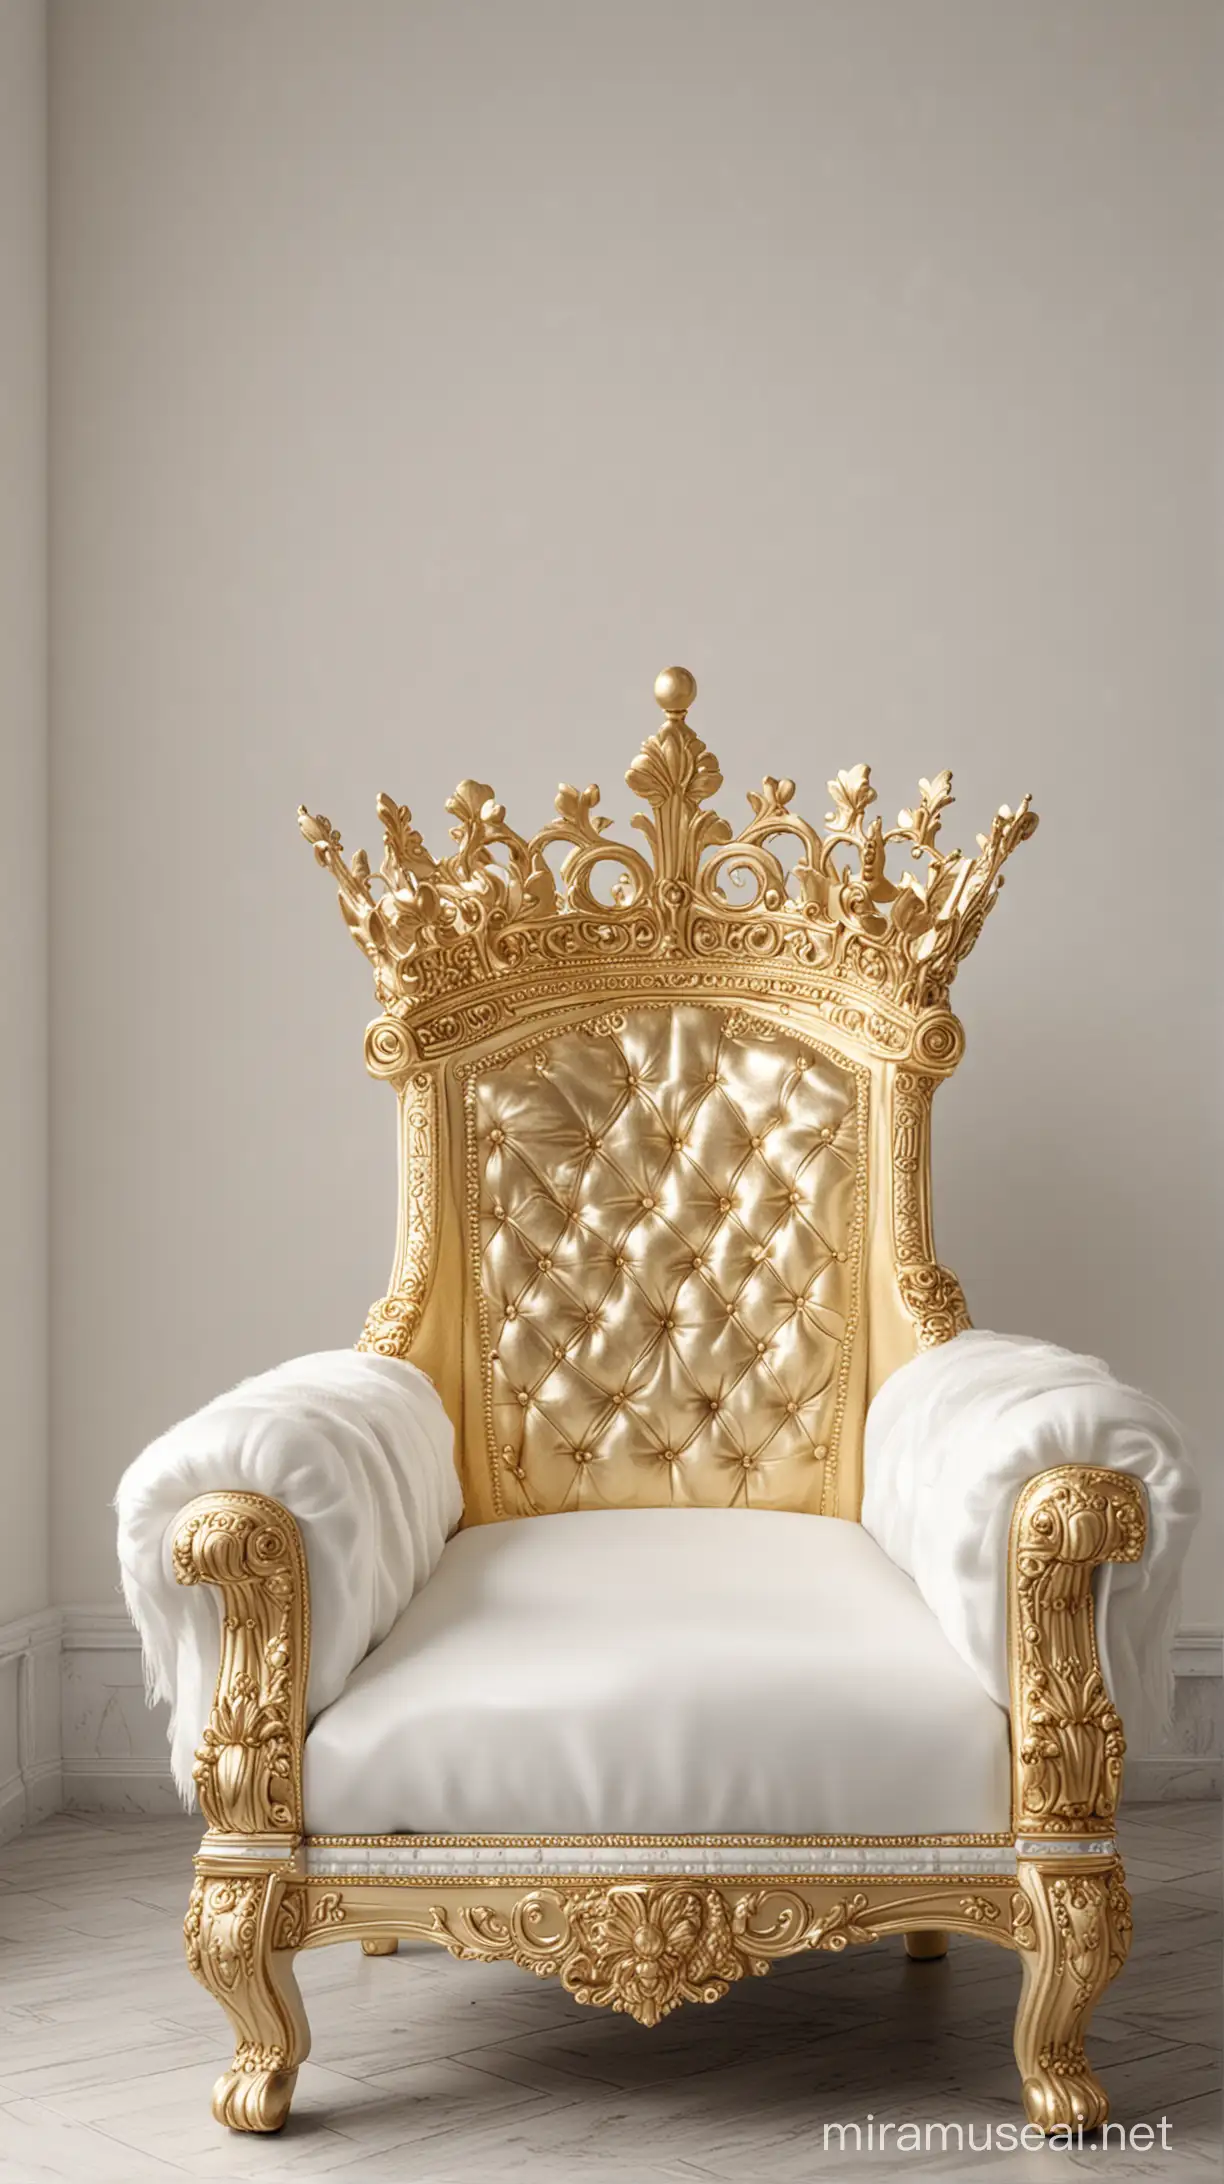 Golden Throne with White Crown Majestic Royalty Symbolized